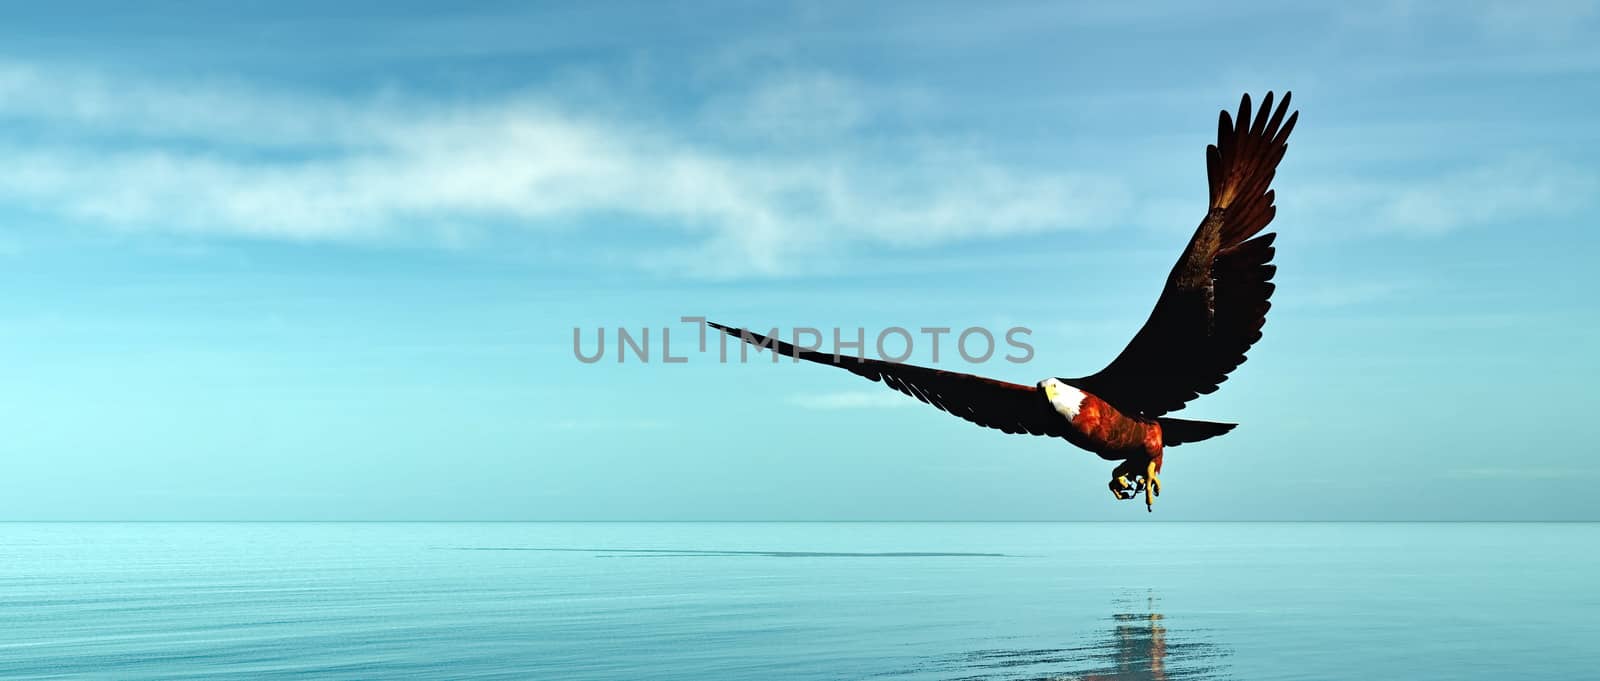 Eagle flying upon ocean by day - 3D render